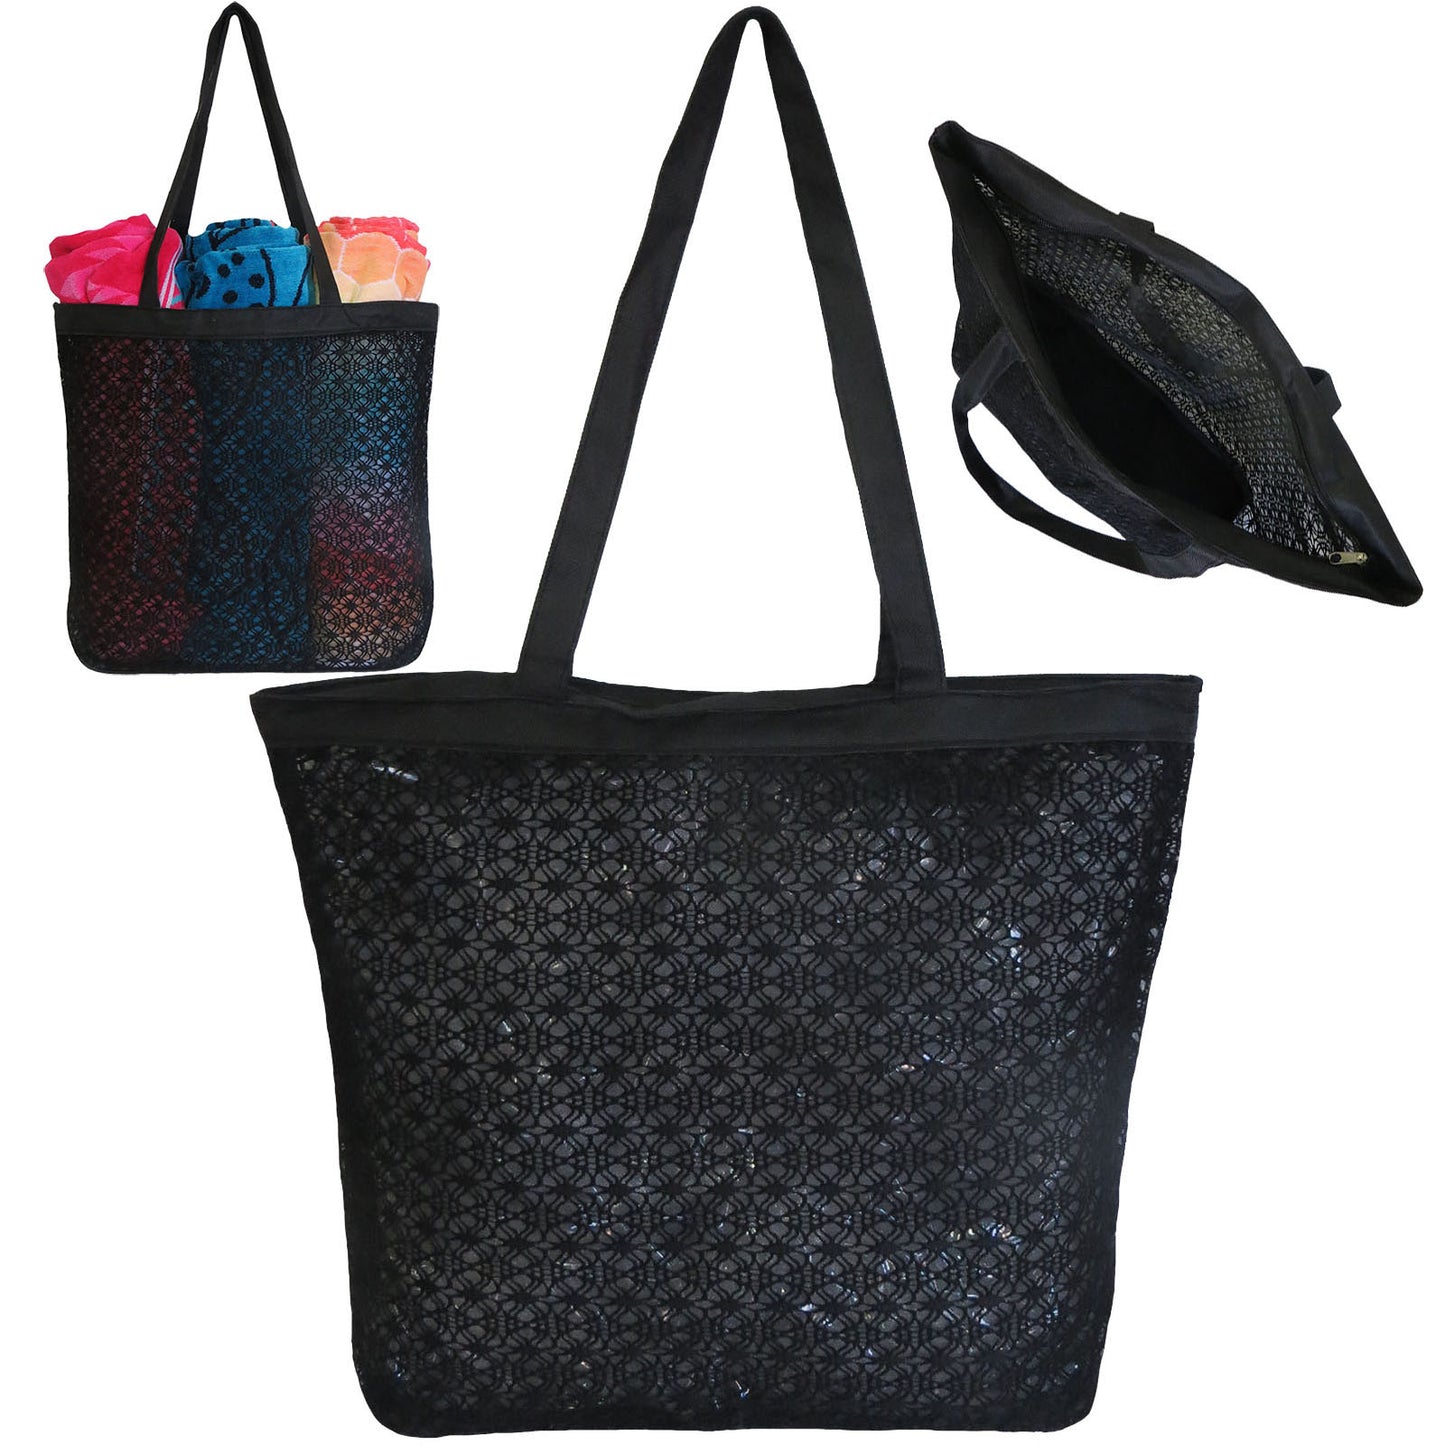 Wholesale Mesh Beach Bag Market Tote with Embroidery - Alessa Vibe in Black